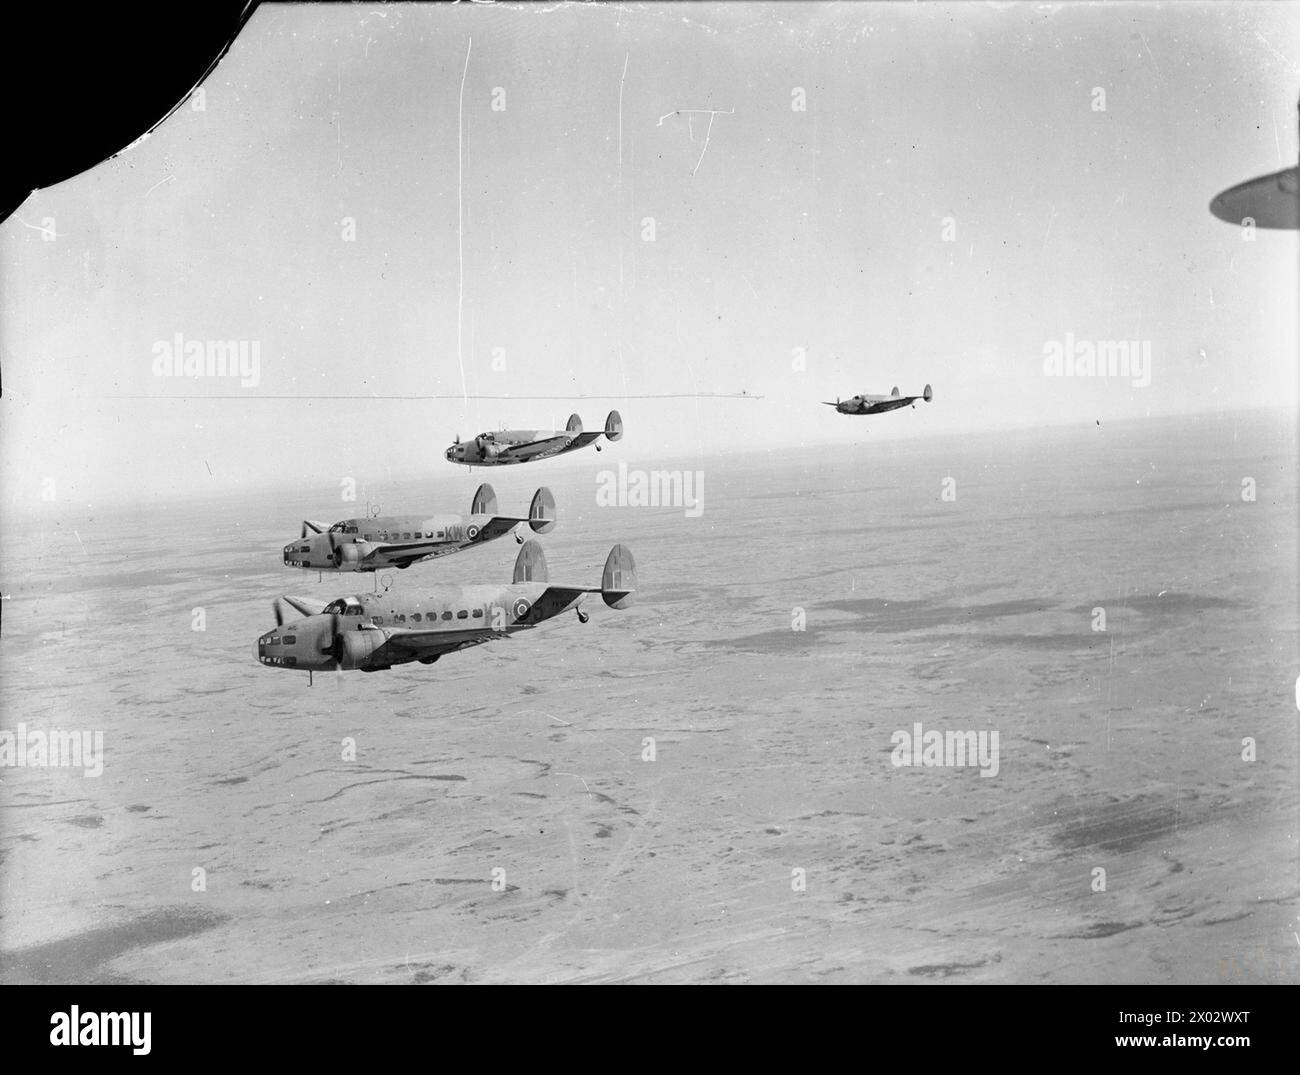 ROYAL AIR FORCE OPERATIONS IN THE MIDDLE EAST AND NORTH AFRICA, 1939-1943. - Three Lockheed Hudson Mark VI transports, (including FK507 KW-S, EW889 KW-E and EW887 KW-C), of No. 267 Squadron RAF based at LG224/Cairo West, Egypt, flying troops to Castel Benito, Tripoli, on an Operation HELPFUL flight  Royal Air Force, Maintenance Unit, 267 Stock Photo